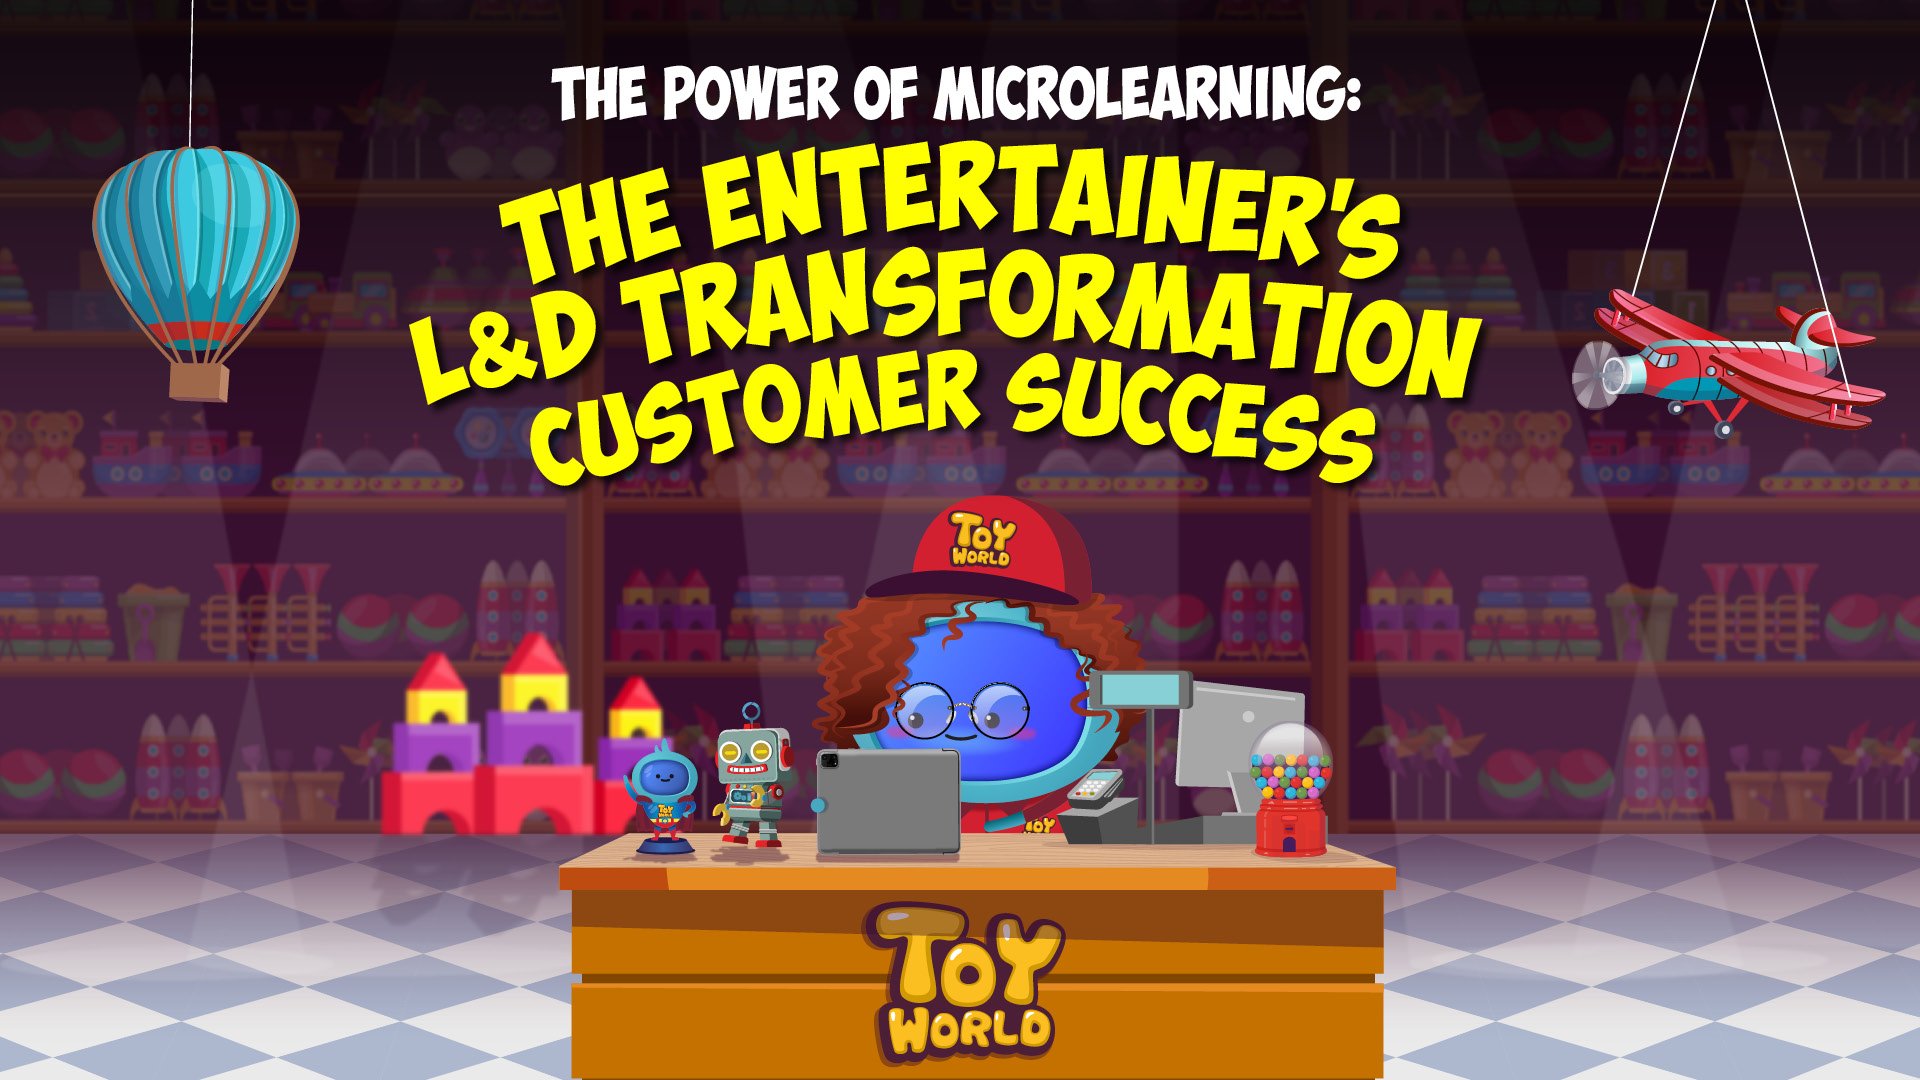 The Entertainers L&D Transformation - Social Proof 1600x900